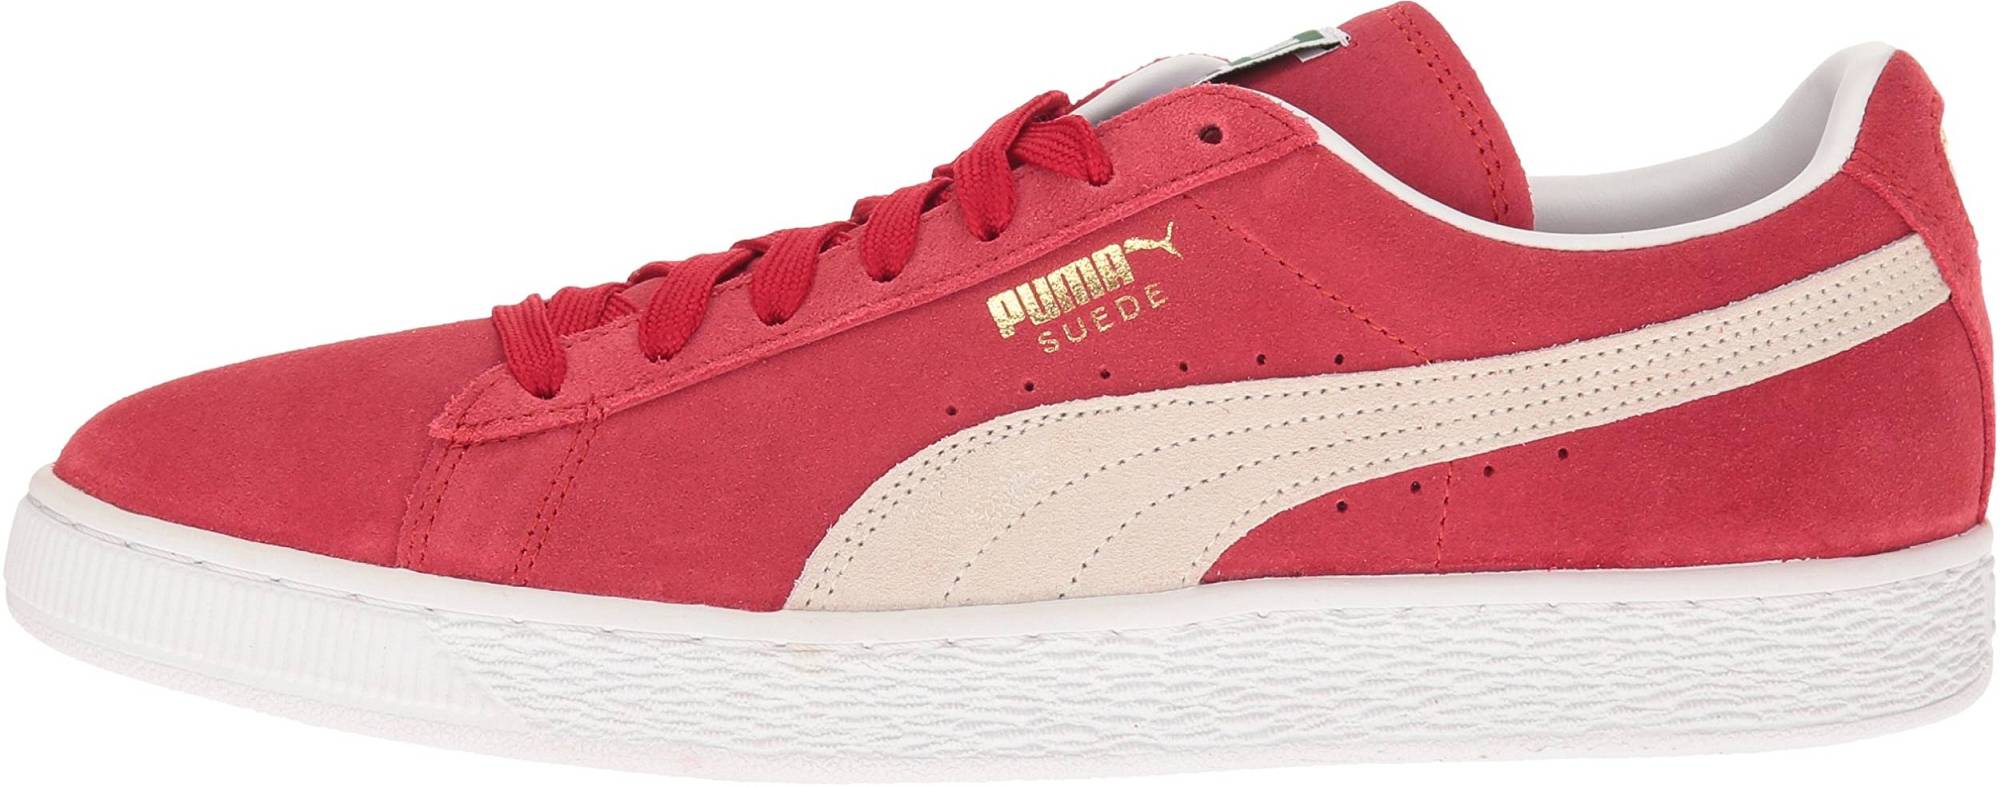 Puma Suede Classic+ – Shoes Reviews & Reasons To Buy